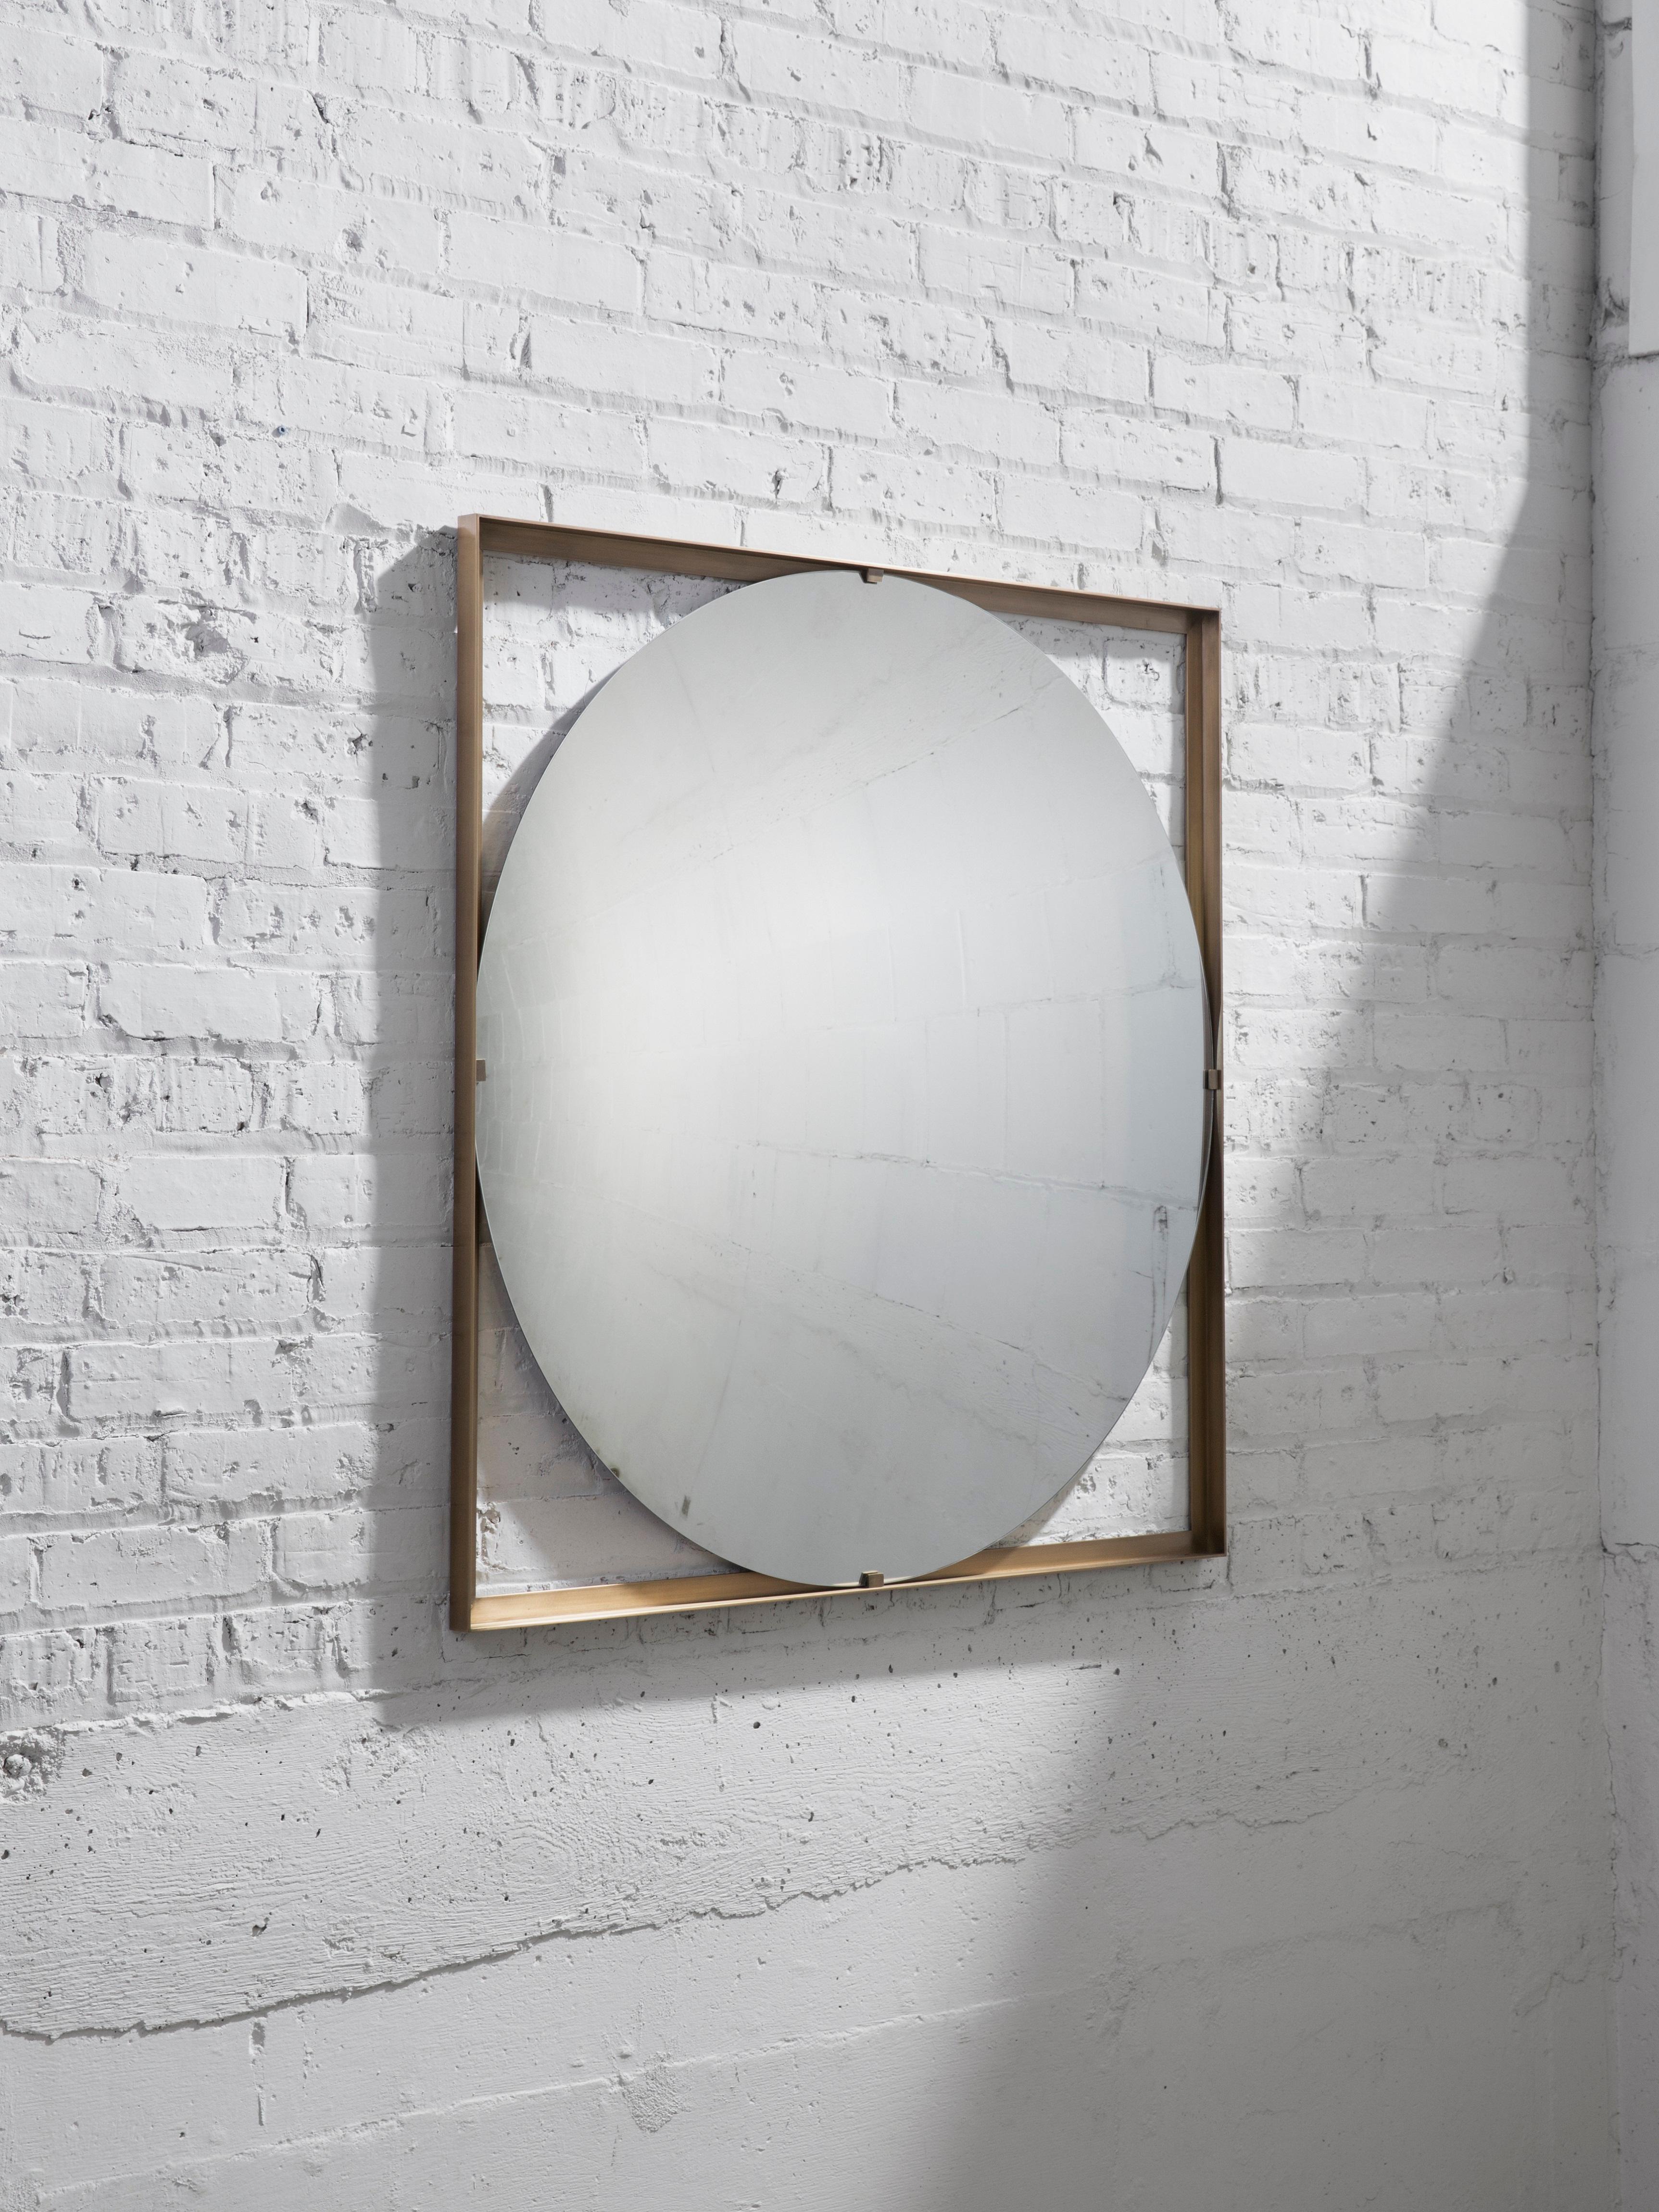 Galt mirror by Gentner Design
Dimensions: D 45.7 x H 2.5 cm
Materials: bronze, mirror
Available in 3 sizes: D45.7cm, D91.4cm, D122cm.

Gentner Design
Rooted in a language of sculpture, character defining details, and world renowned craftsmanship,